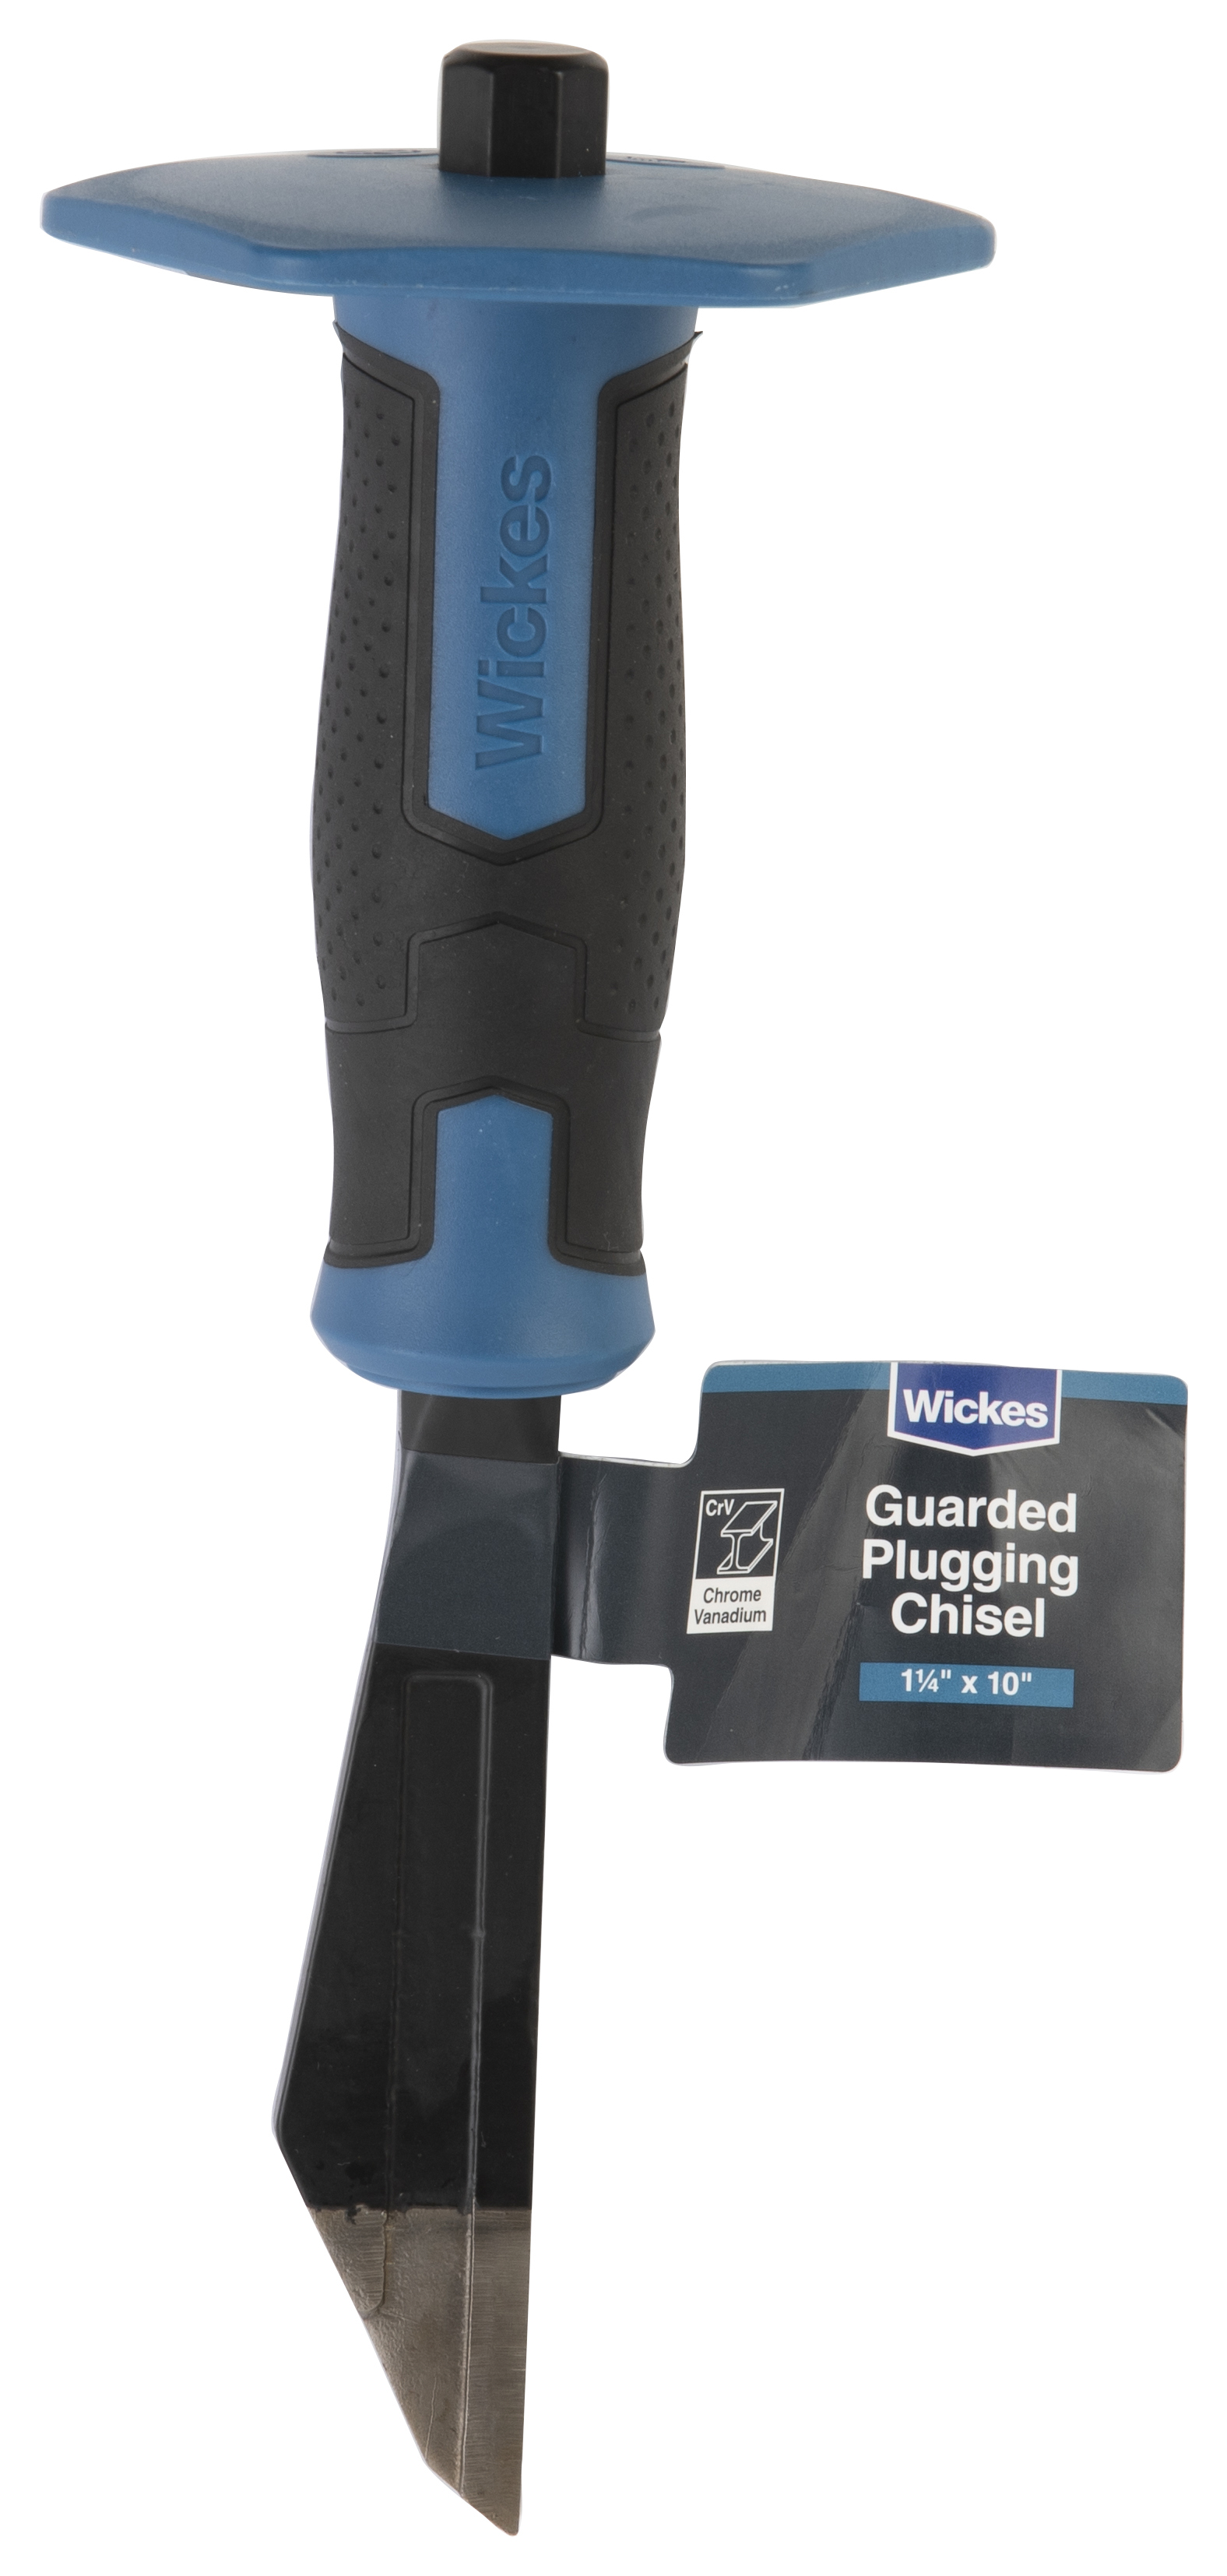 Wickes Guarded Plugging Chisel 1" x 10"